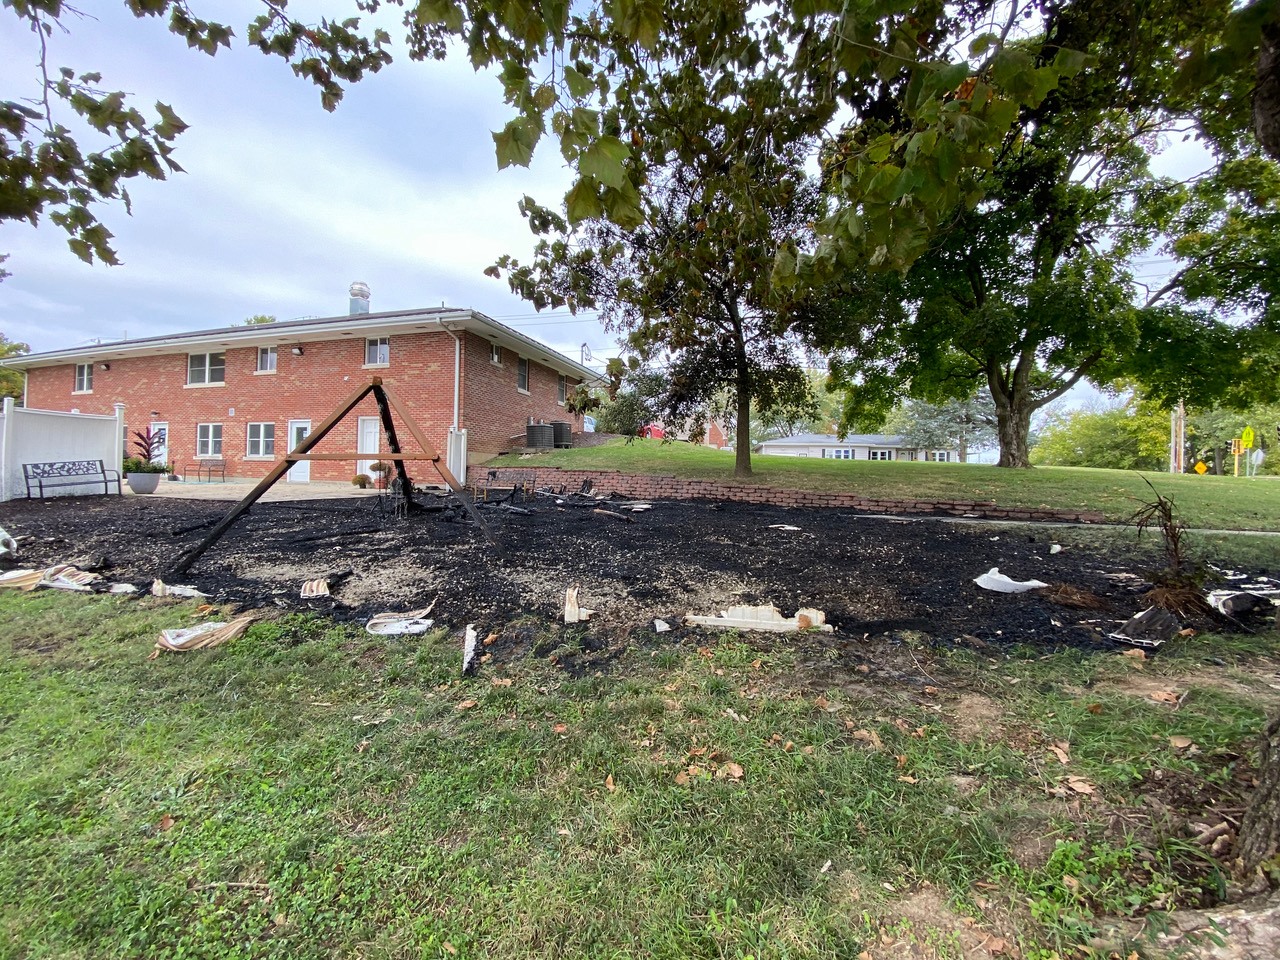 The charred remains of the 2021 playground fire.